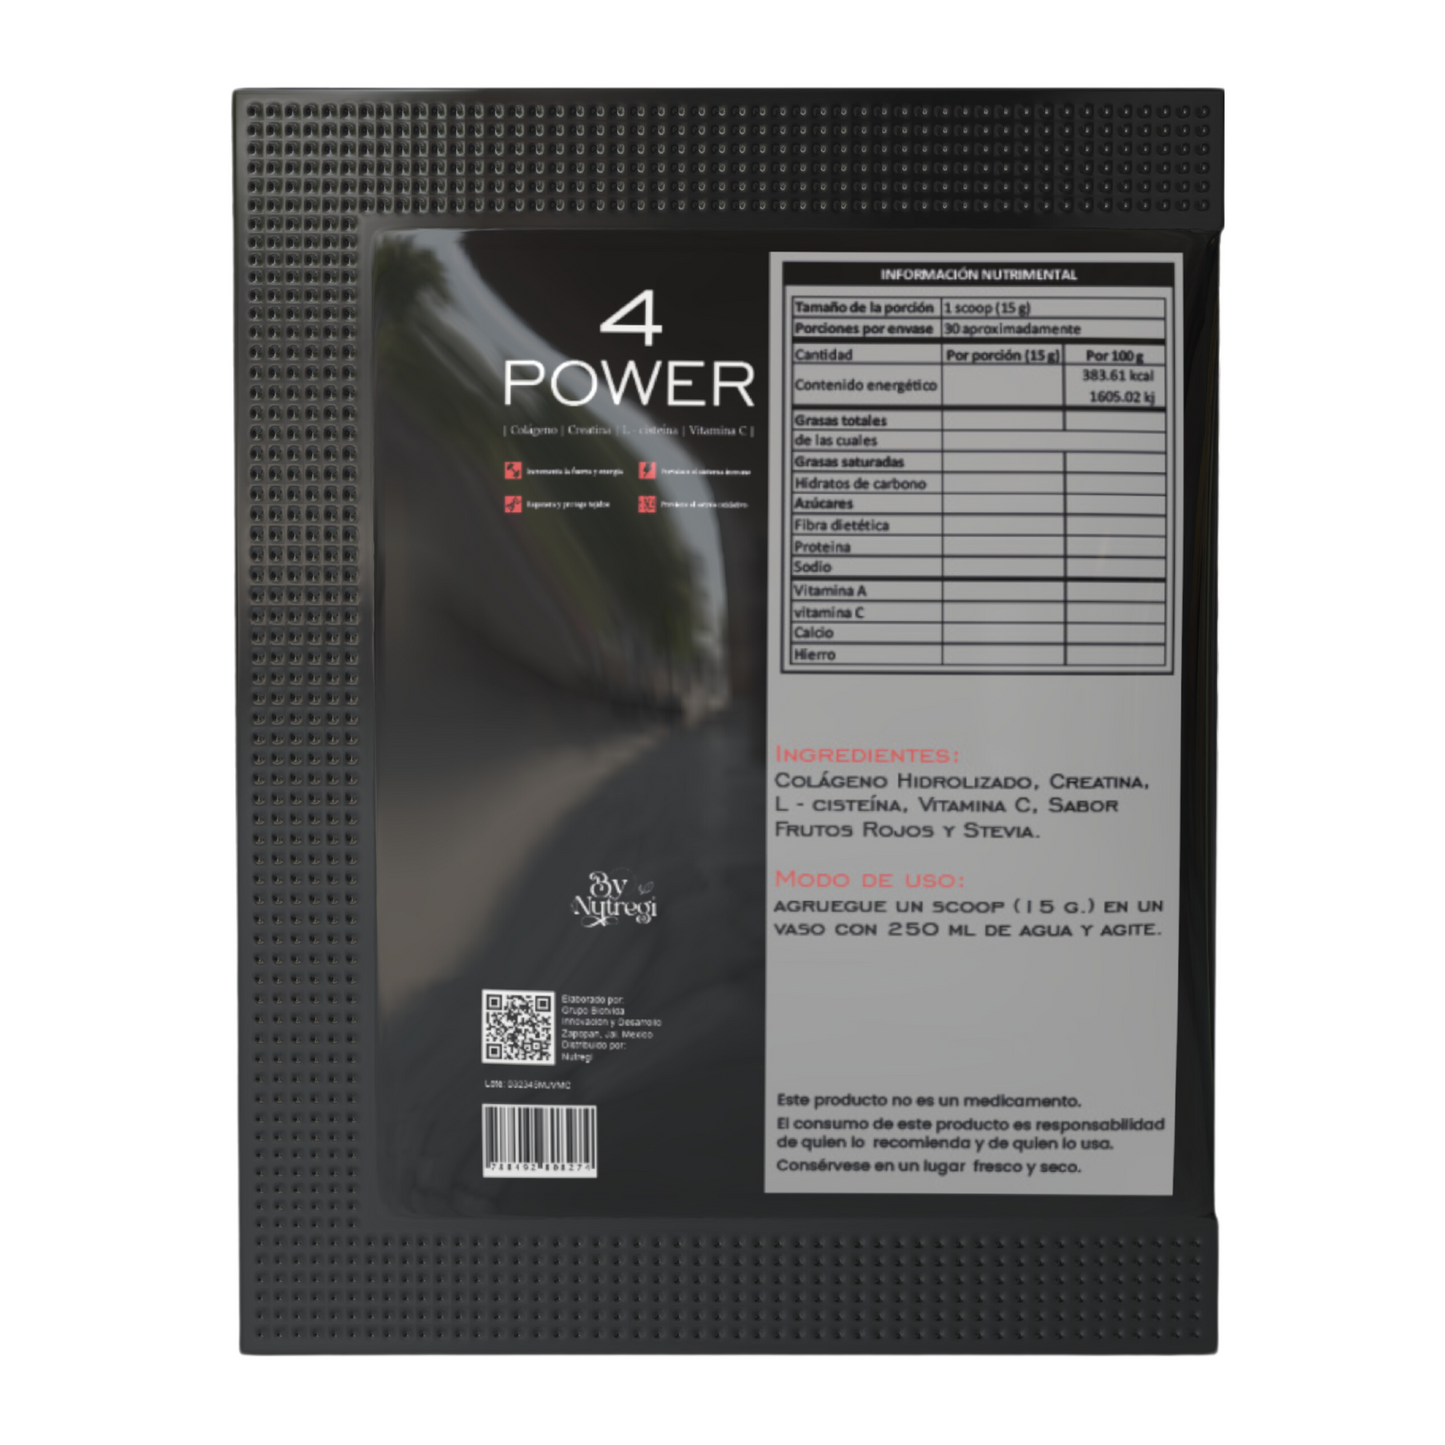 4 POWER- PAQUETE 10 SACHETS INDIVIDUALES